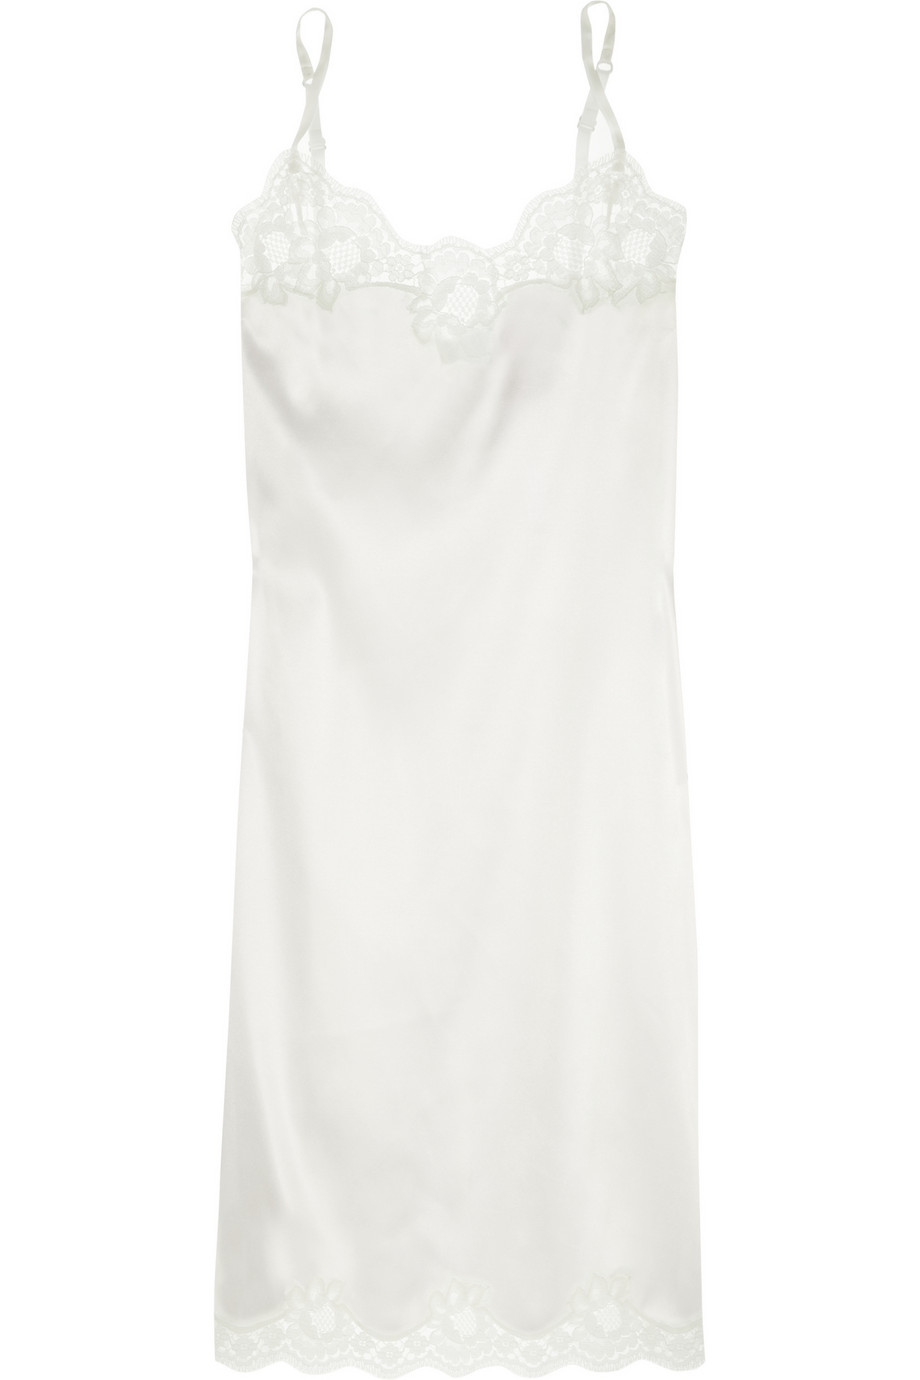 Dolce & Gabbana Lace trimmed Stretch silk Satin Chemise in White - Lyst